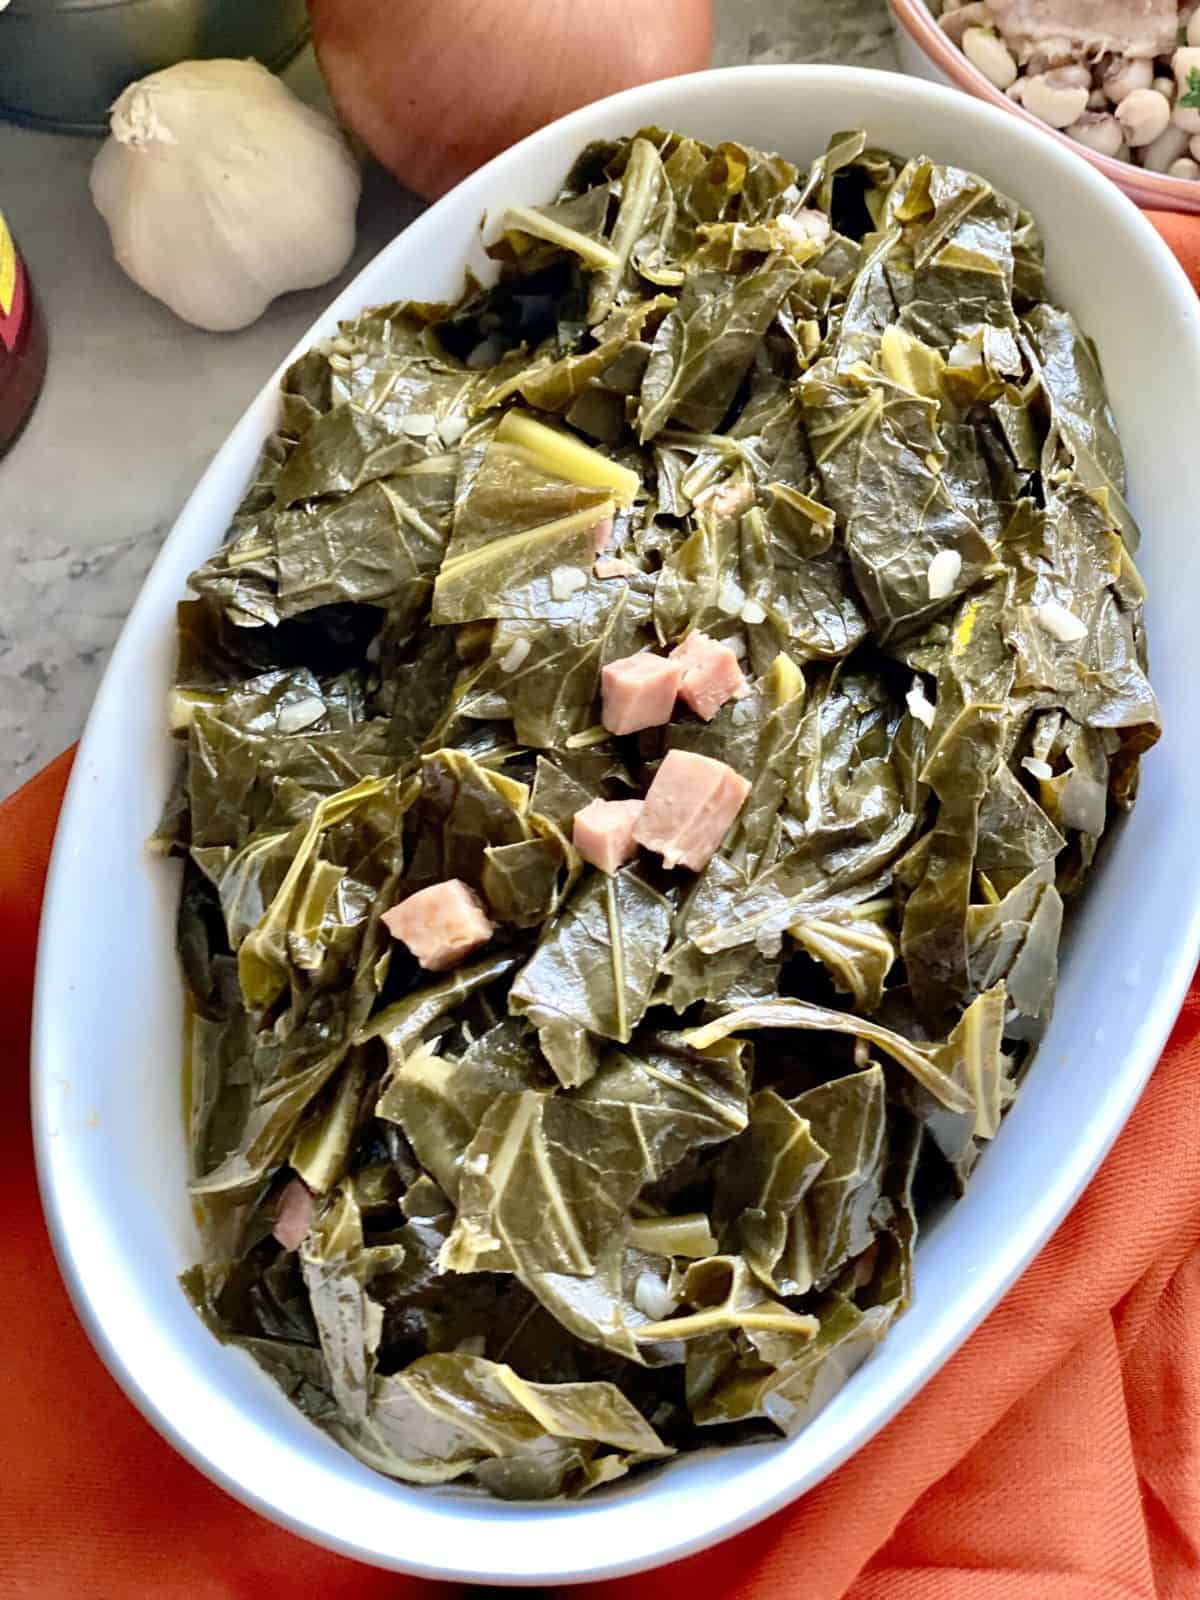 Top view of cooked collard greens in white serving dish